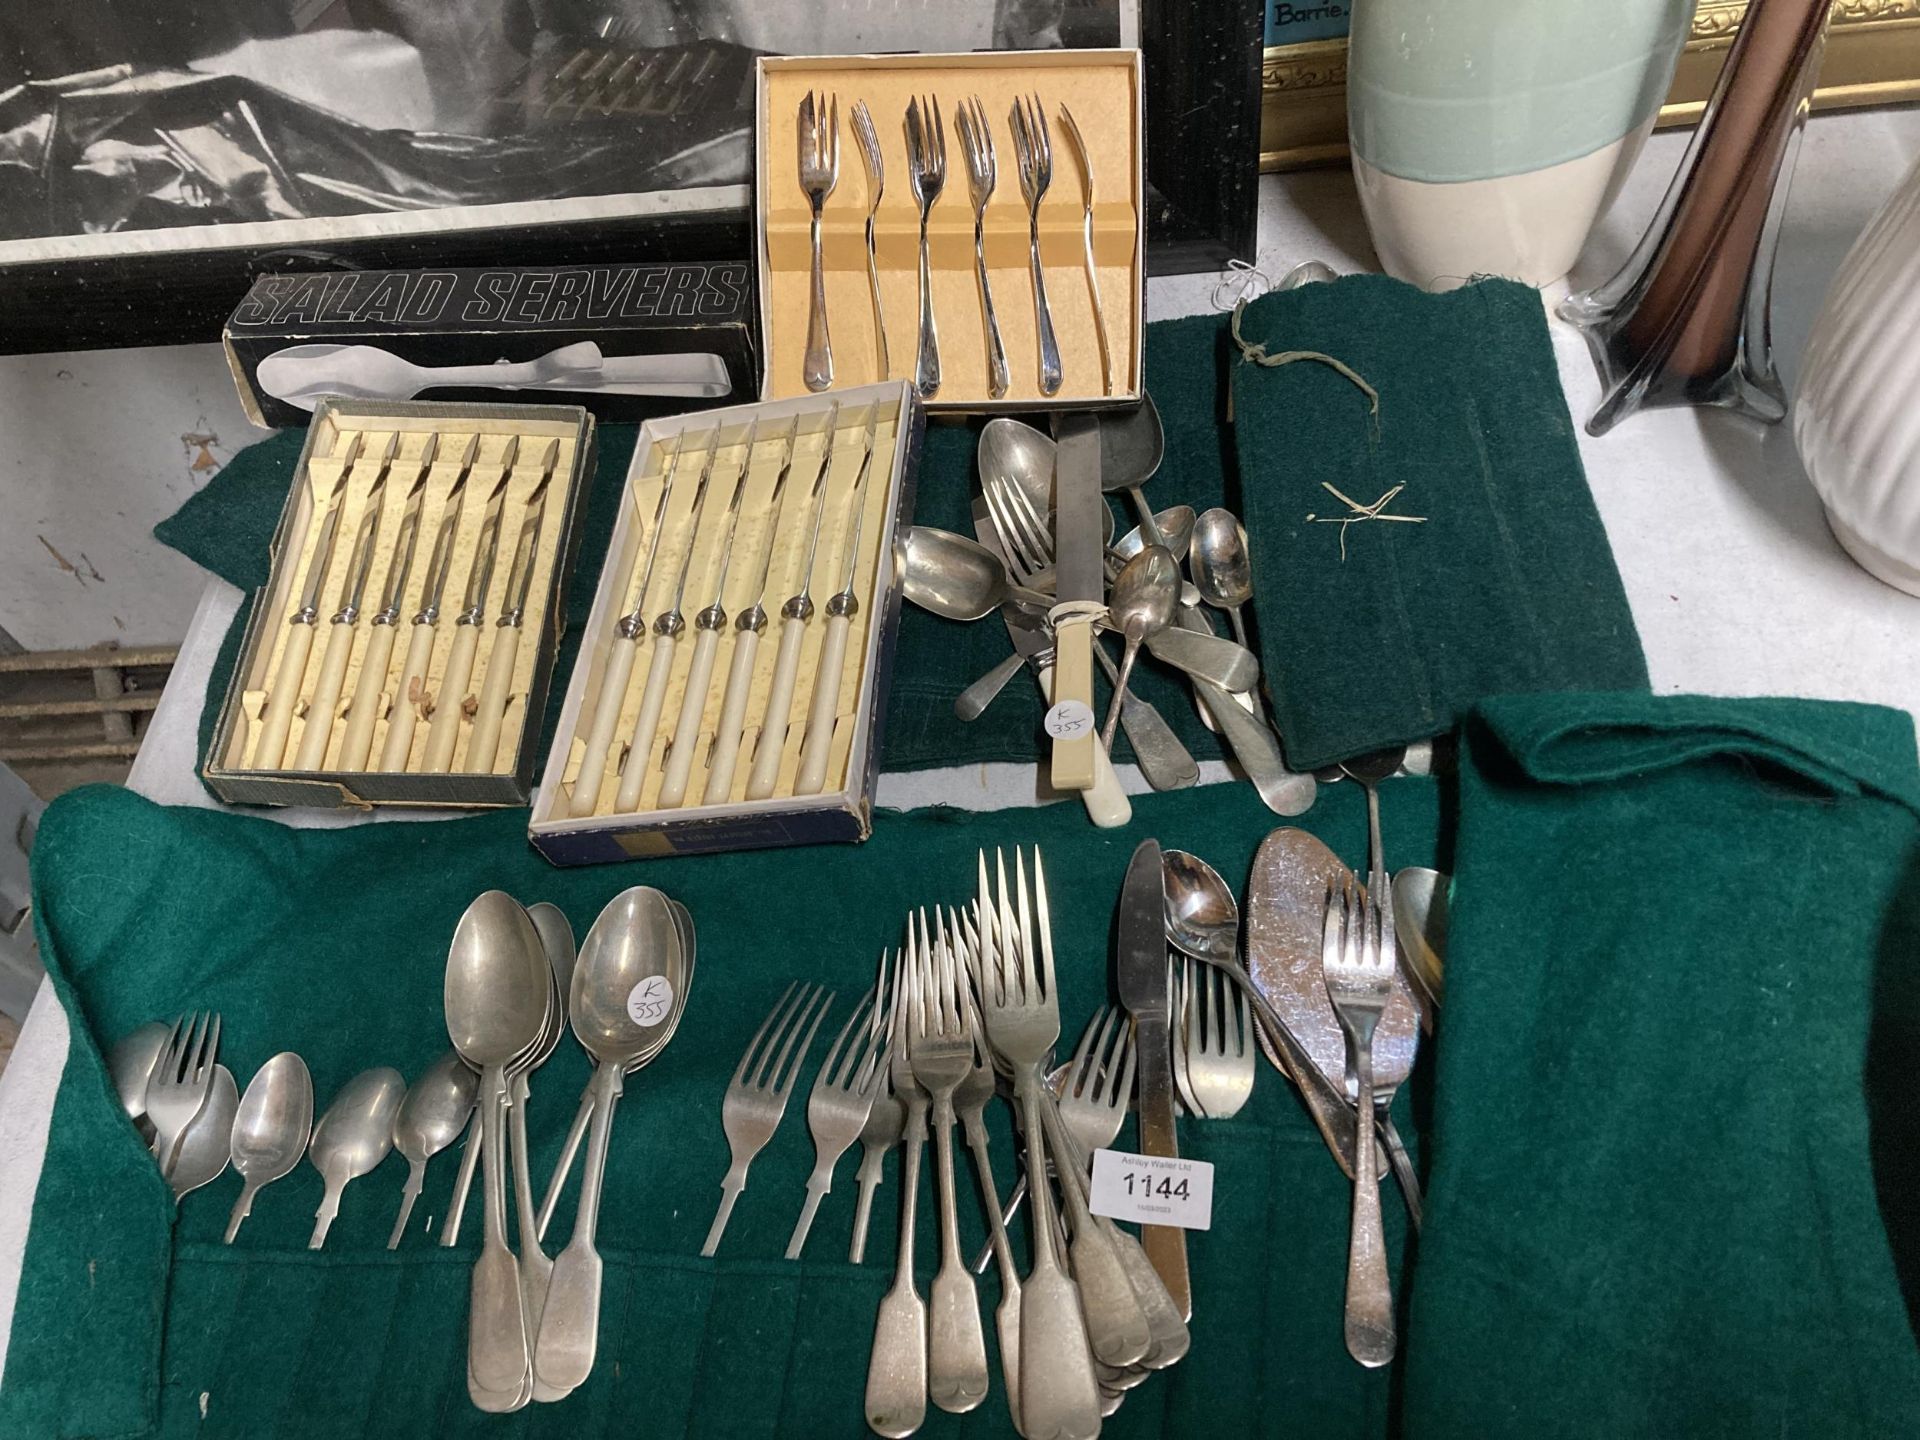 A LARGE AMOUNT OF VINTAGE BOXED AND UNBOXED FLATWARE TO INCLUDE KNIVES, FORKS, SPOONS, ETC